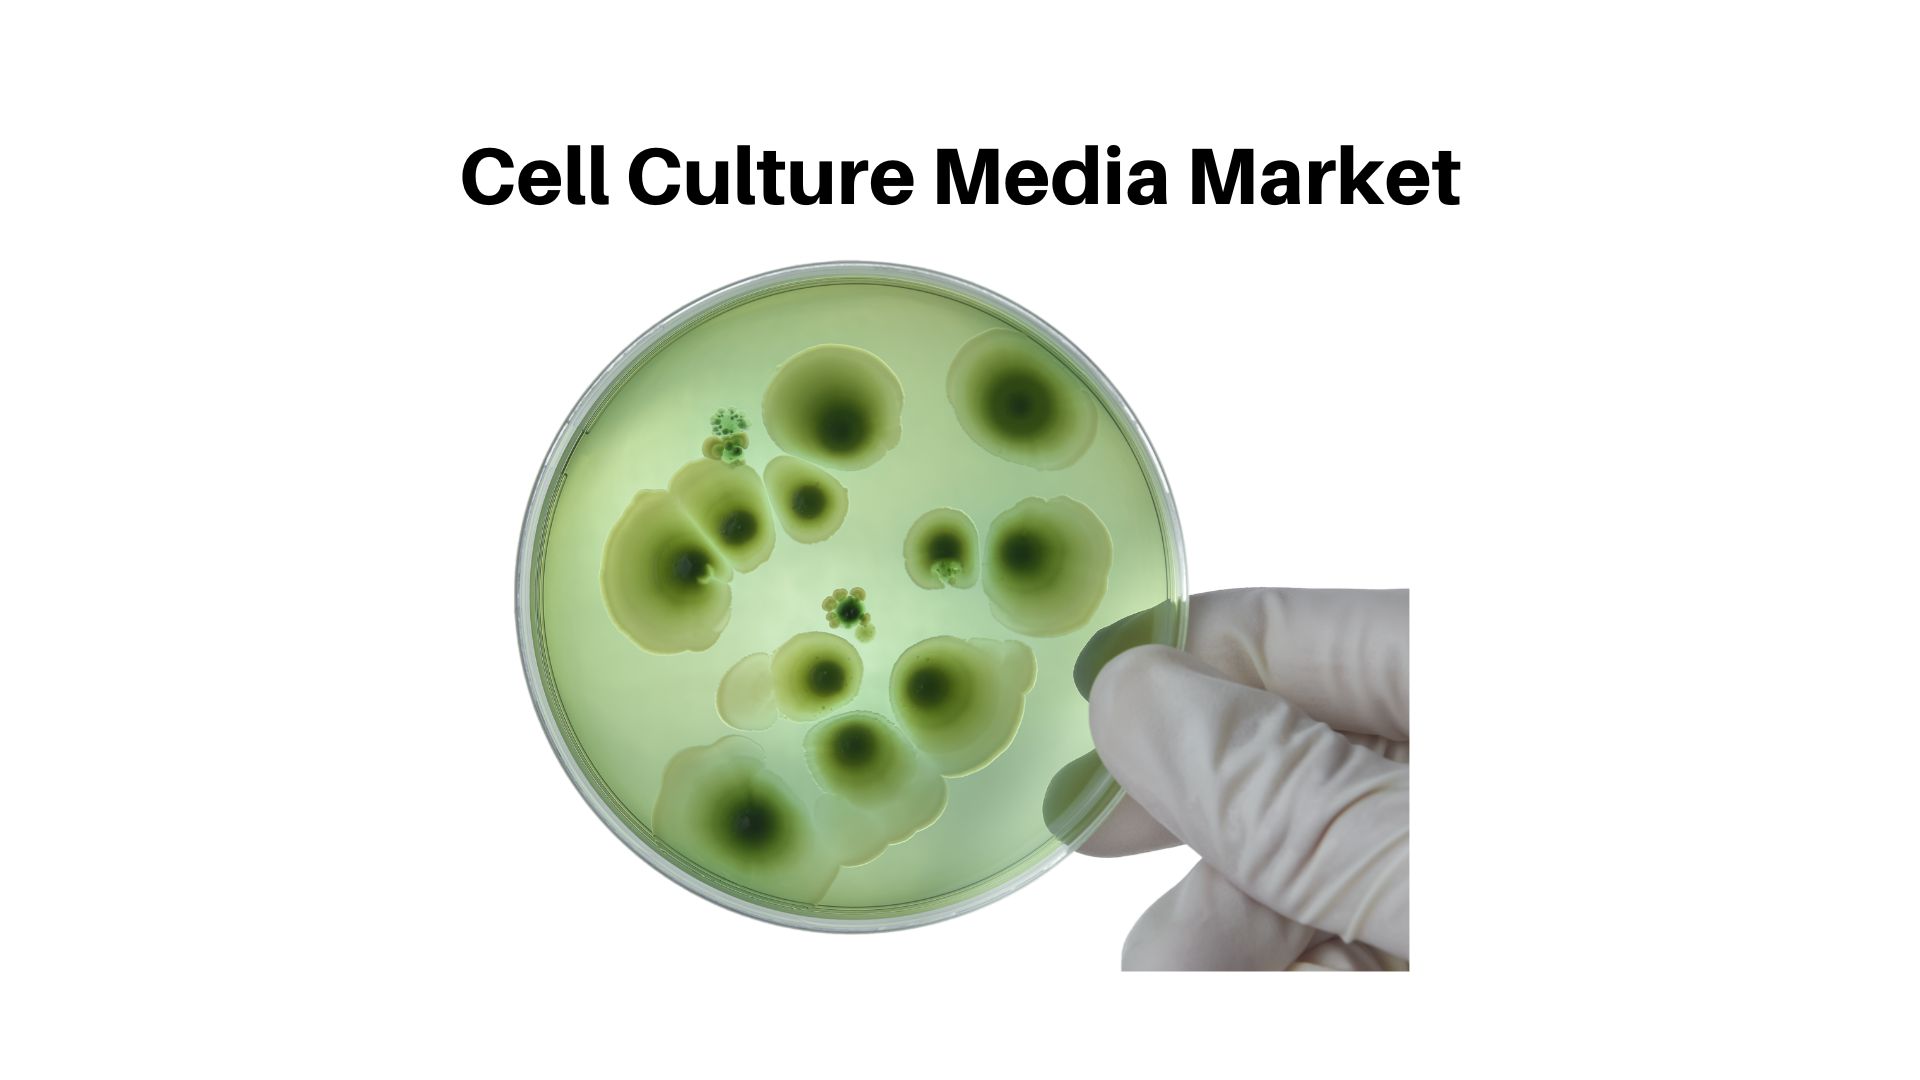 Cell Culture Media Market is estimated to be worth USD 2.32 Bn in 2032